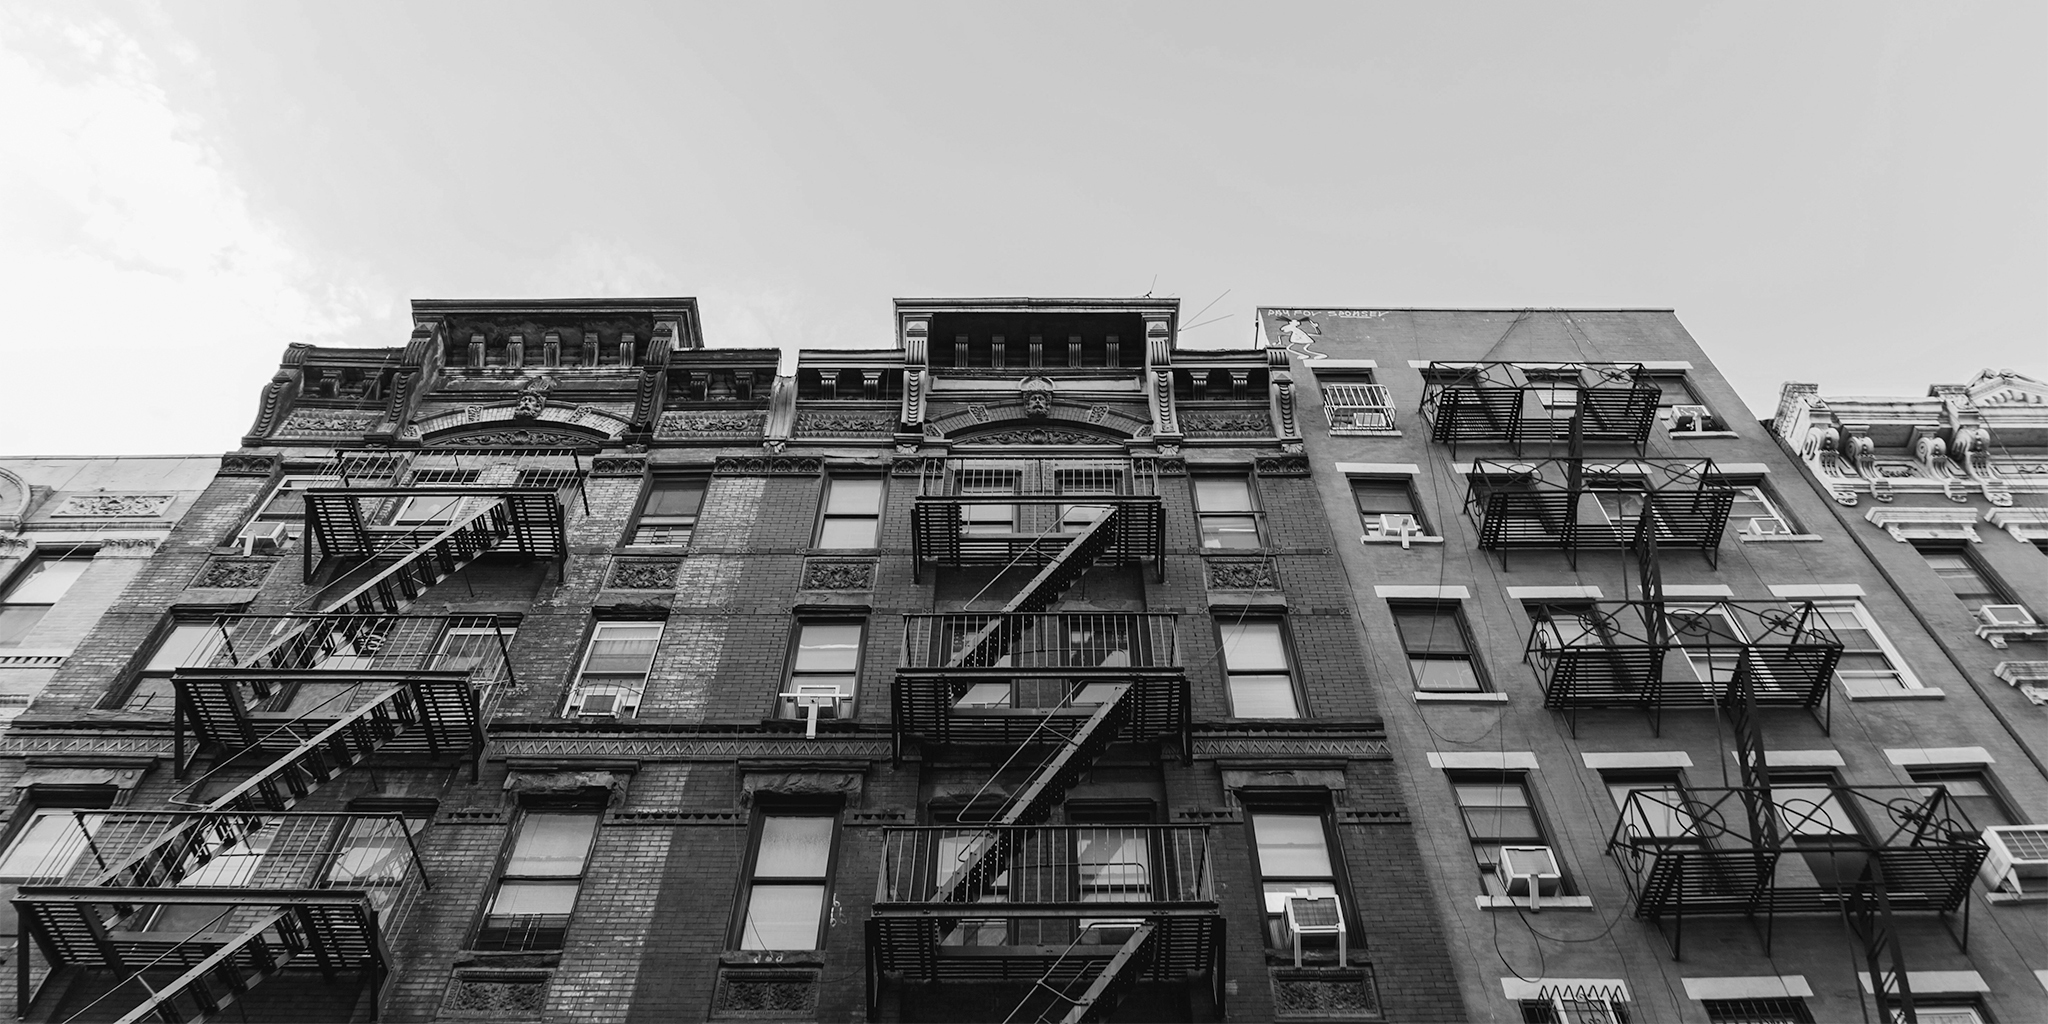 upward view showing a buiding with multiple fire escapes stairs in grayscale